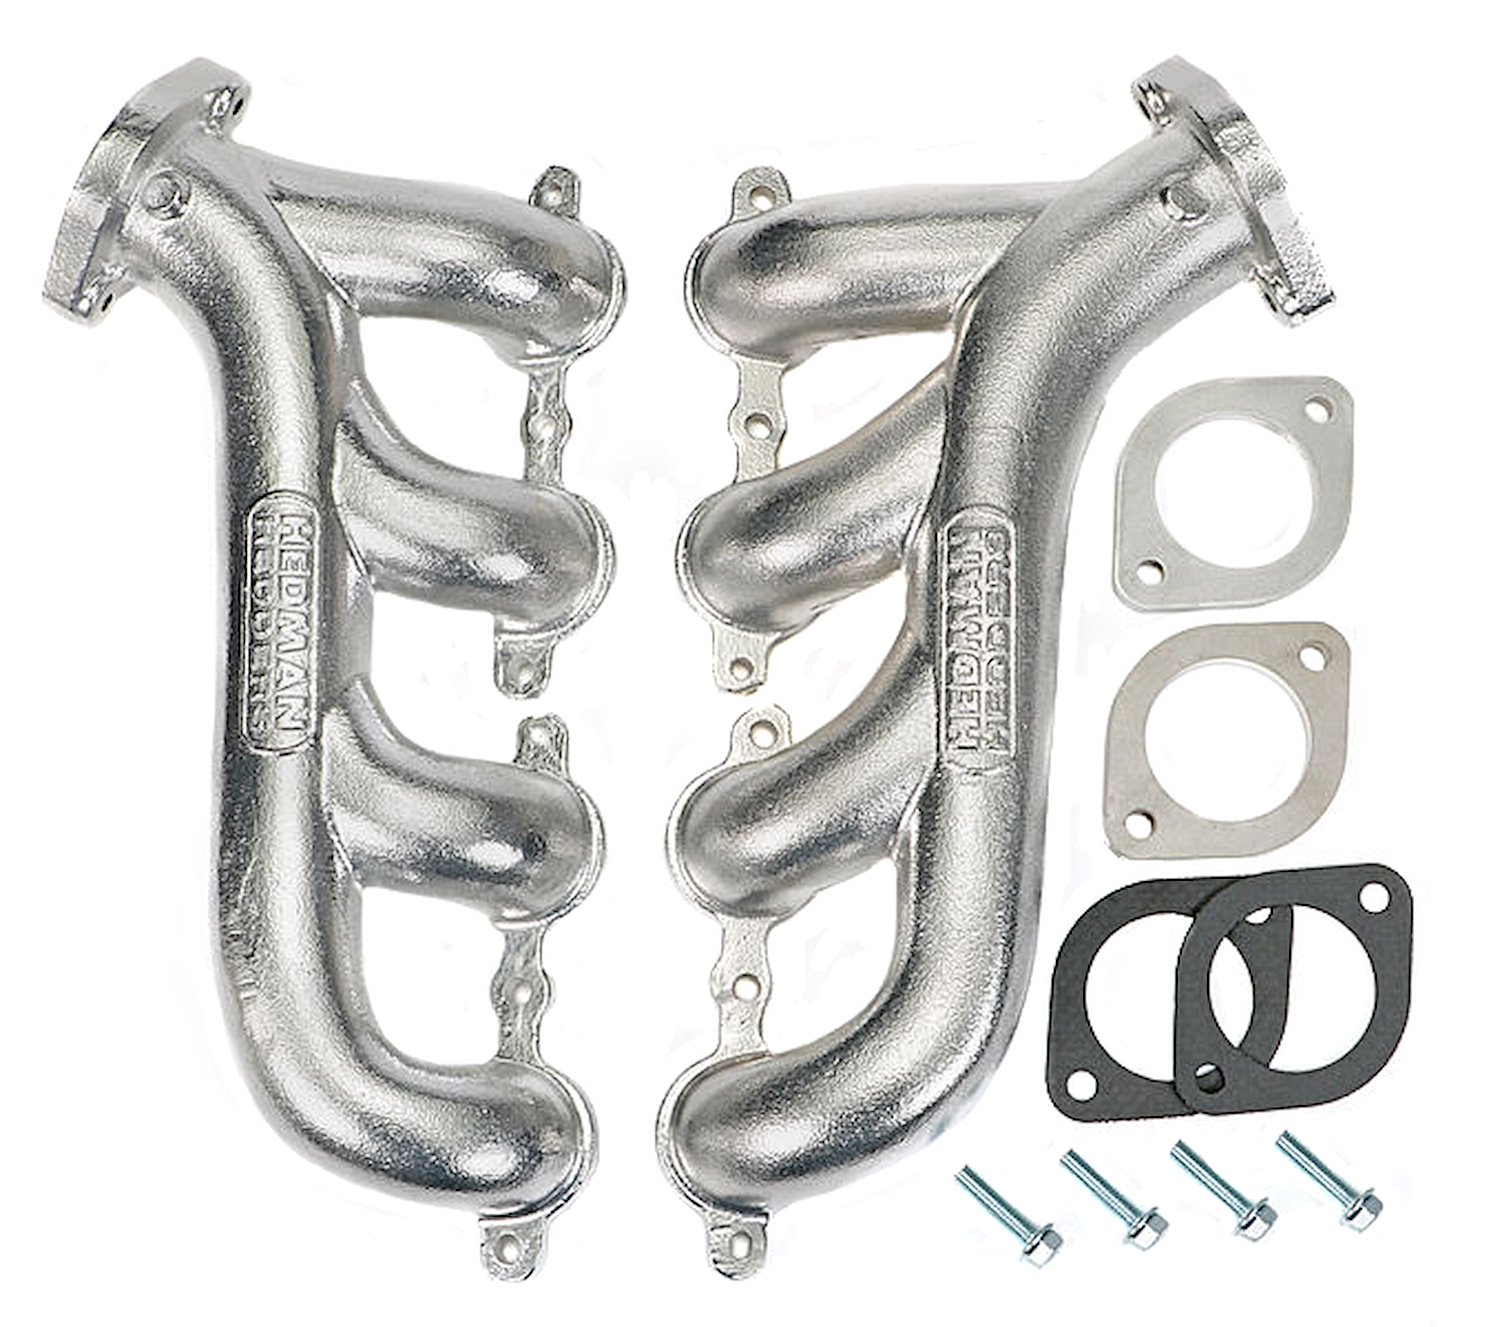 LS-Swap Cast Iron Exhaust Manifolds HTC Polished Silver Finish